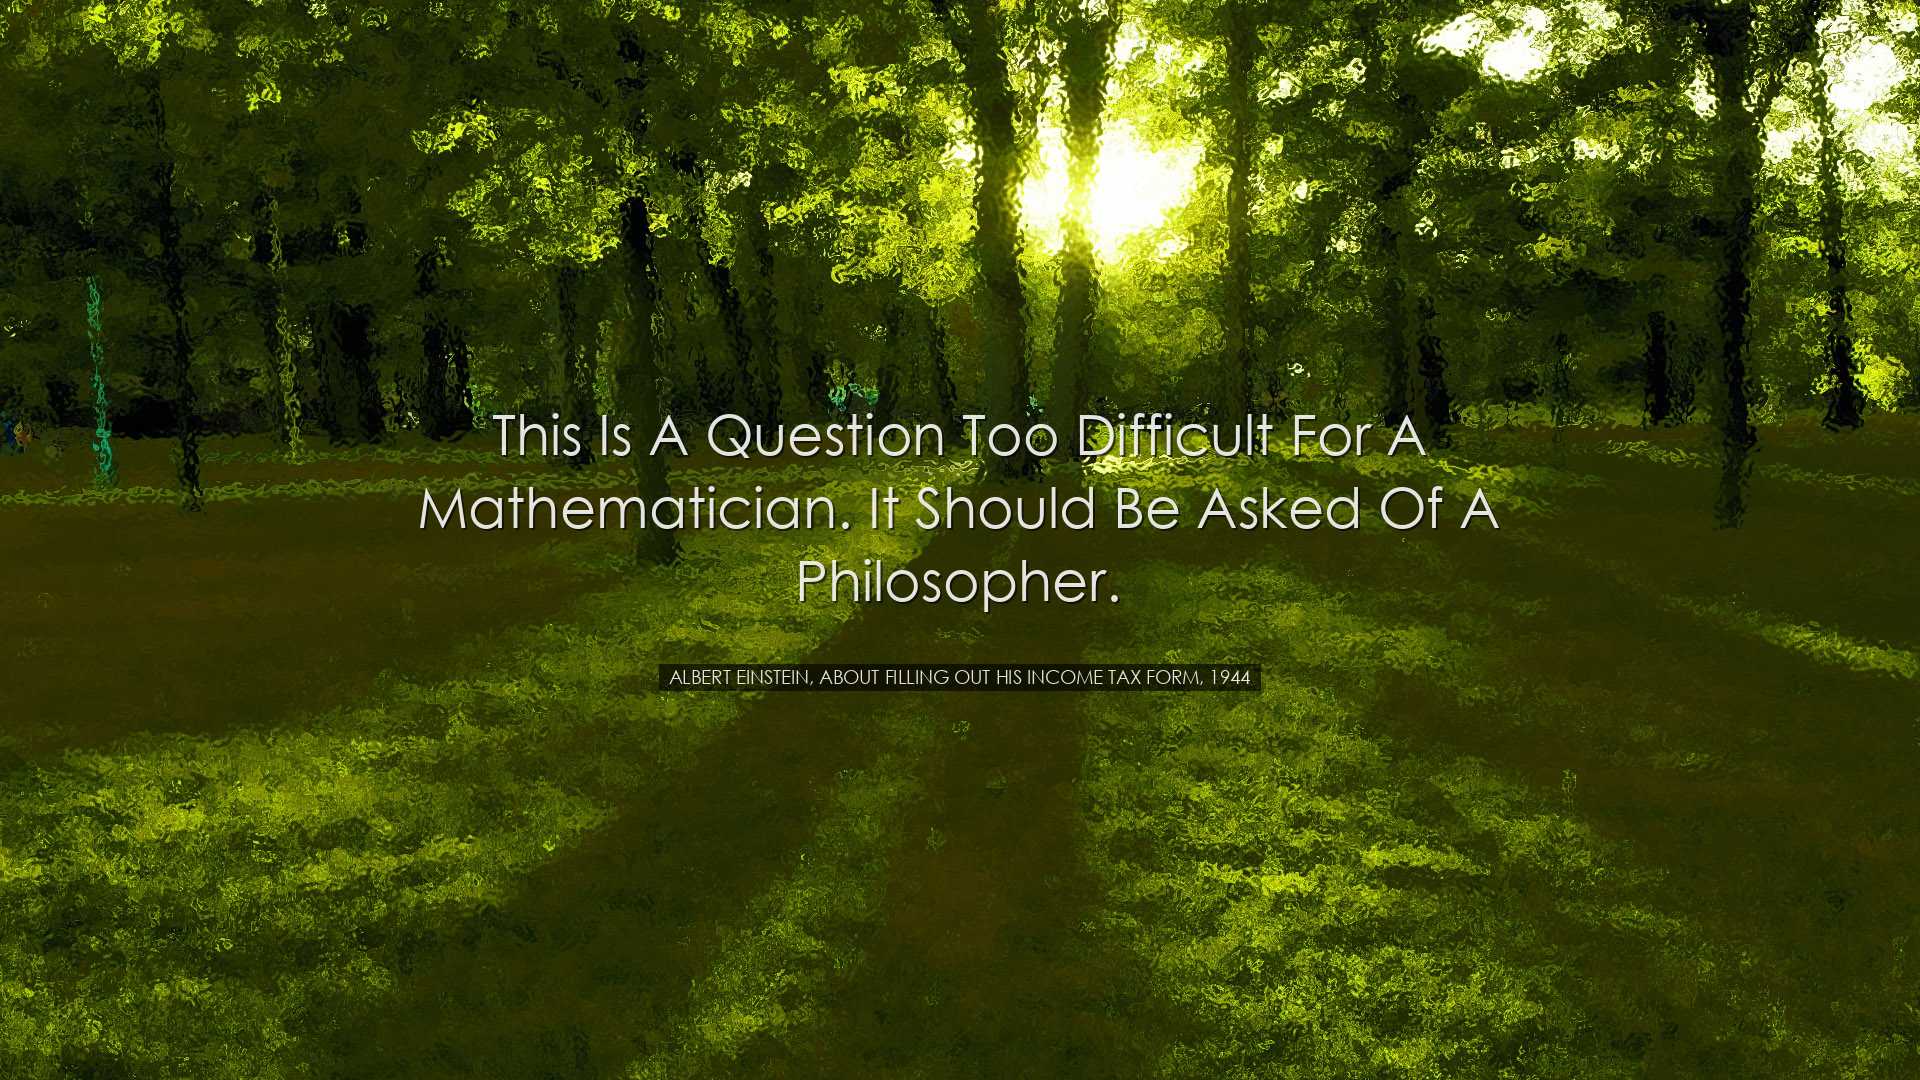 This is a question too difficult for a mathematician. It should be